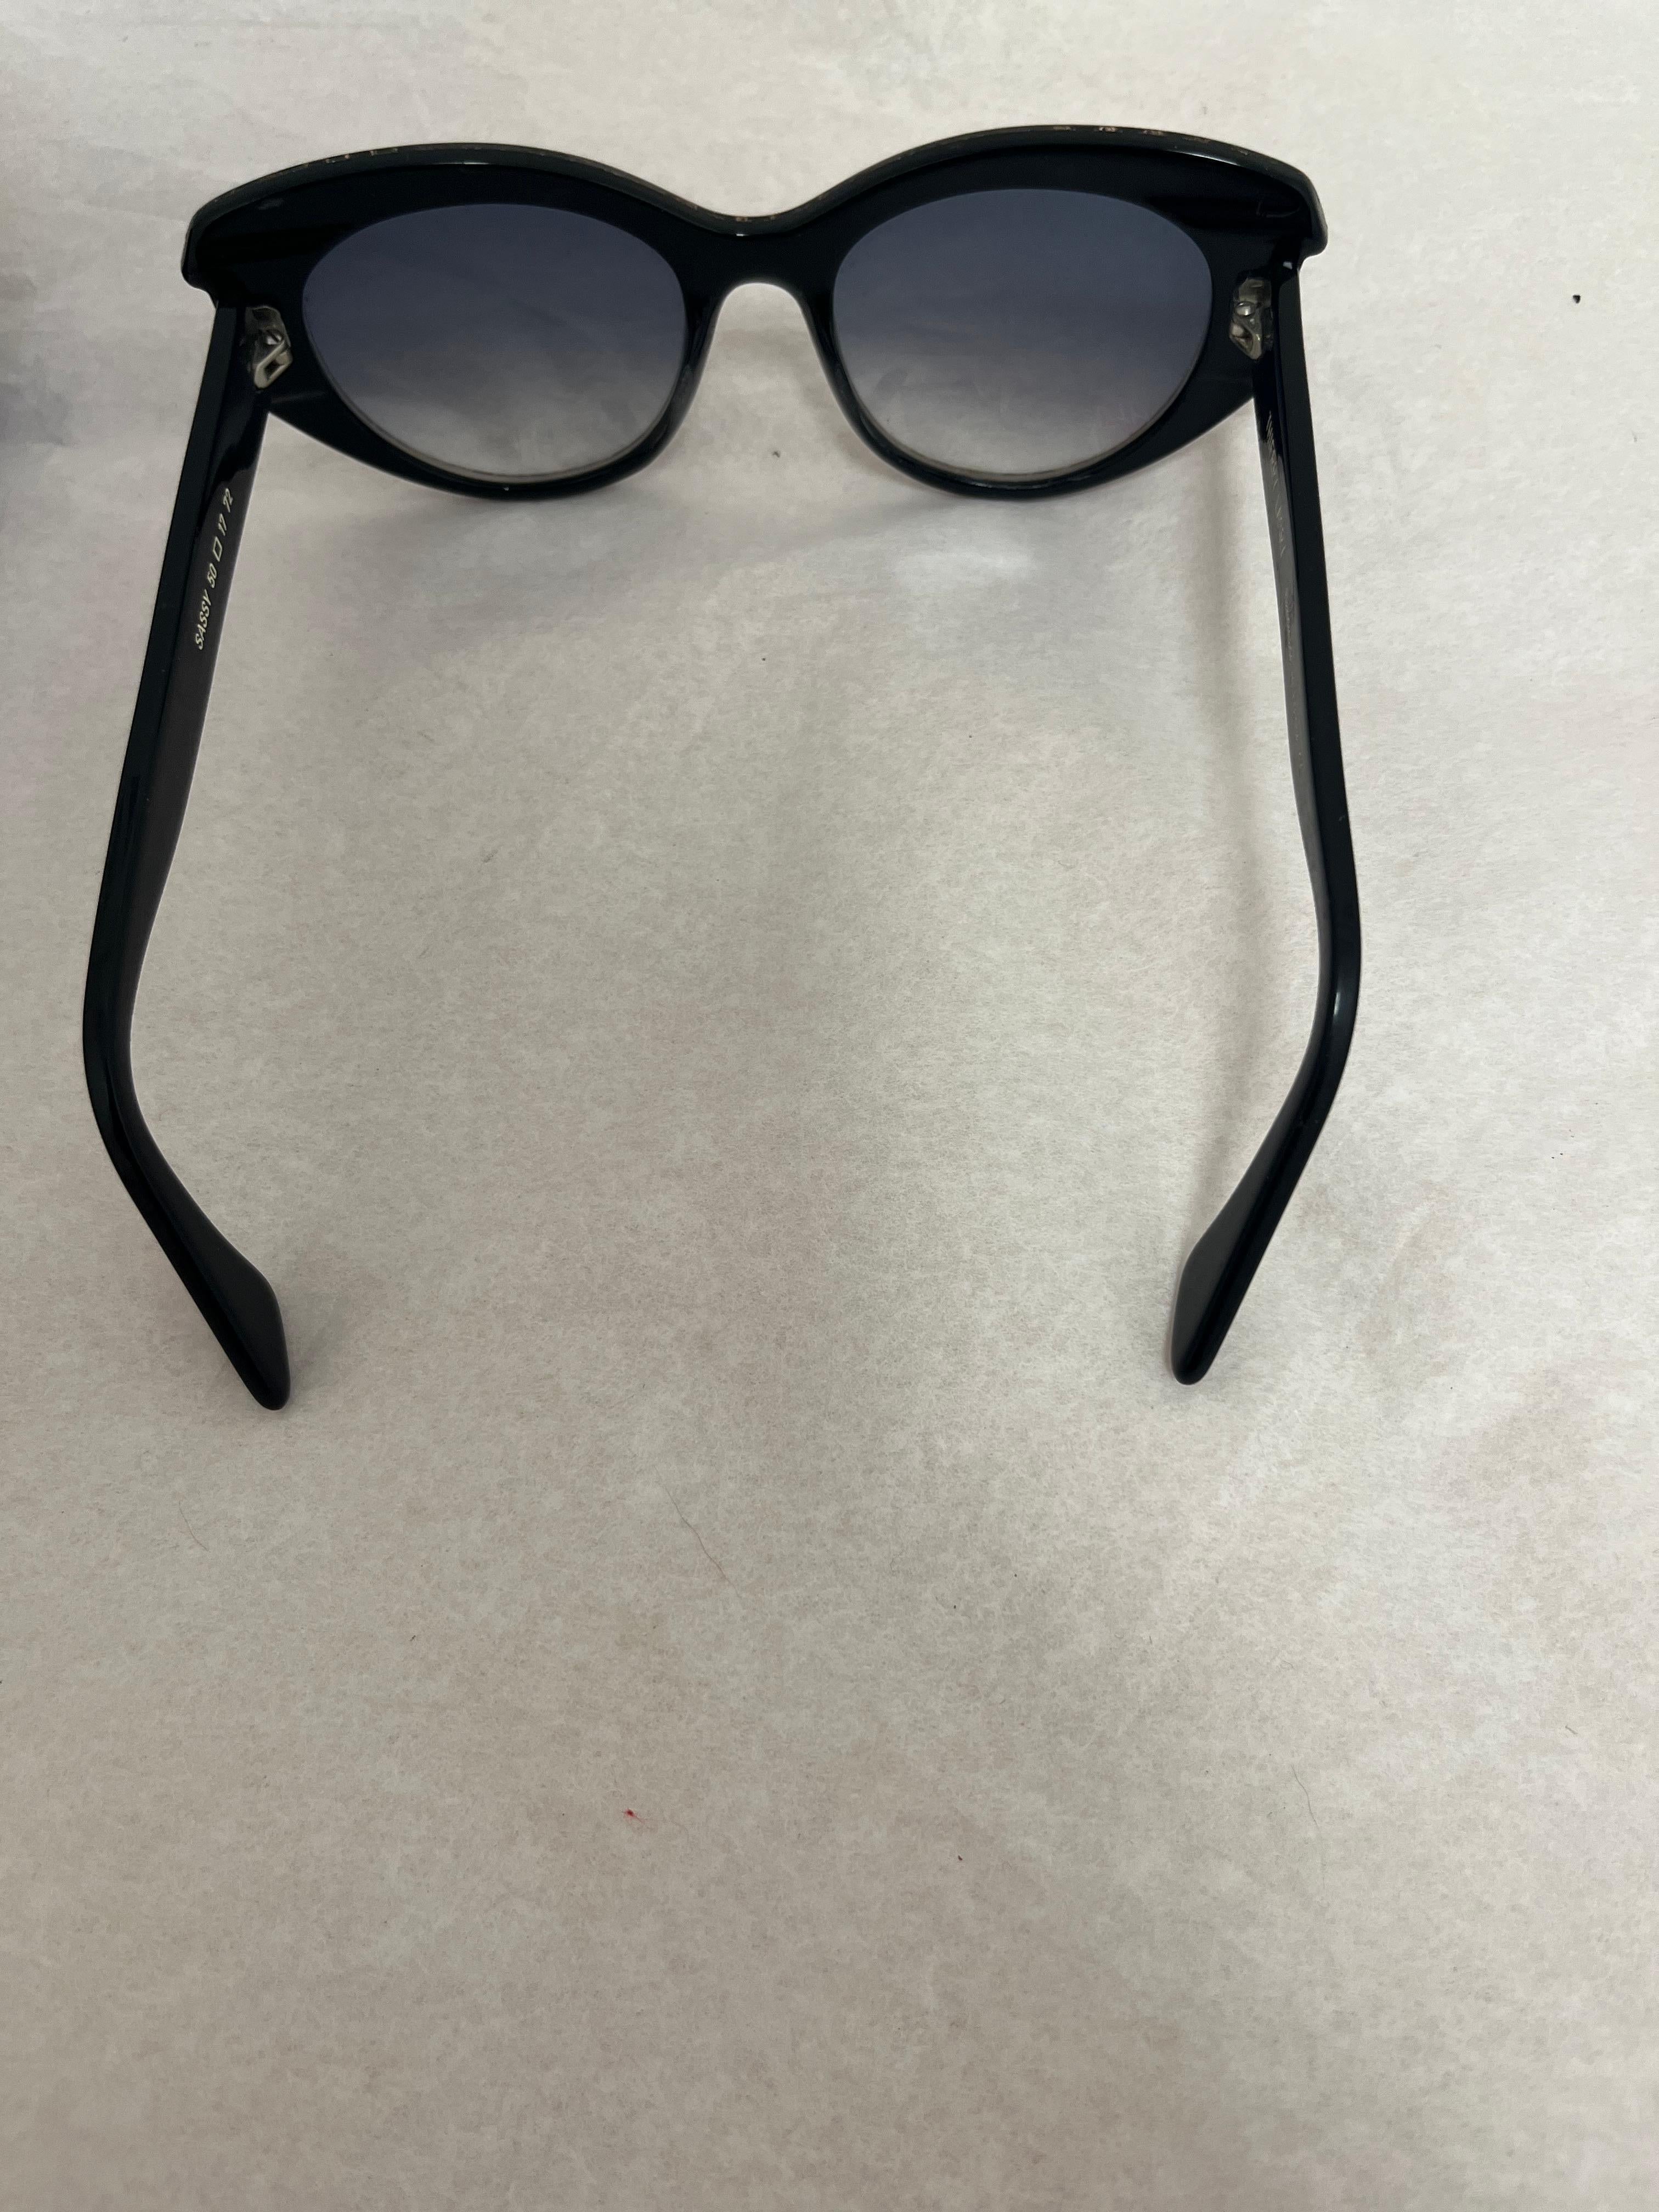 Thierry Lasry Sunglasses Hand Made in France In Excellent Condition For Sale In Port Hope, ON